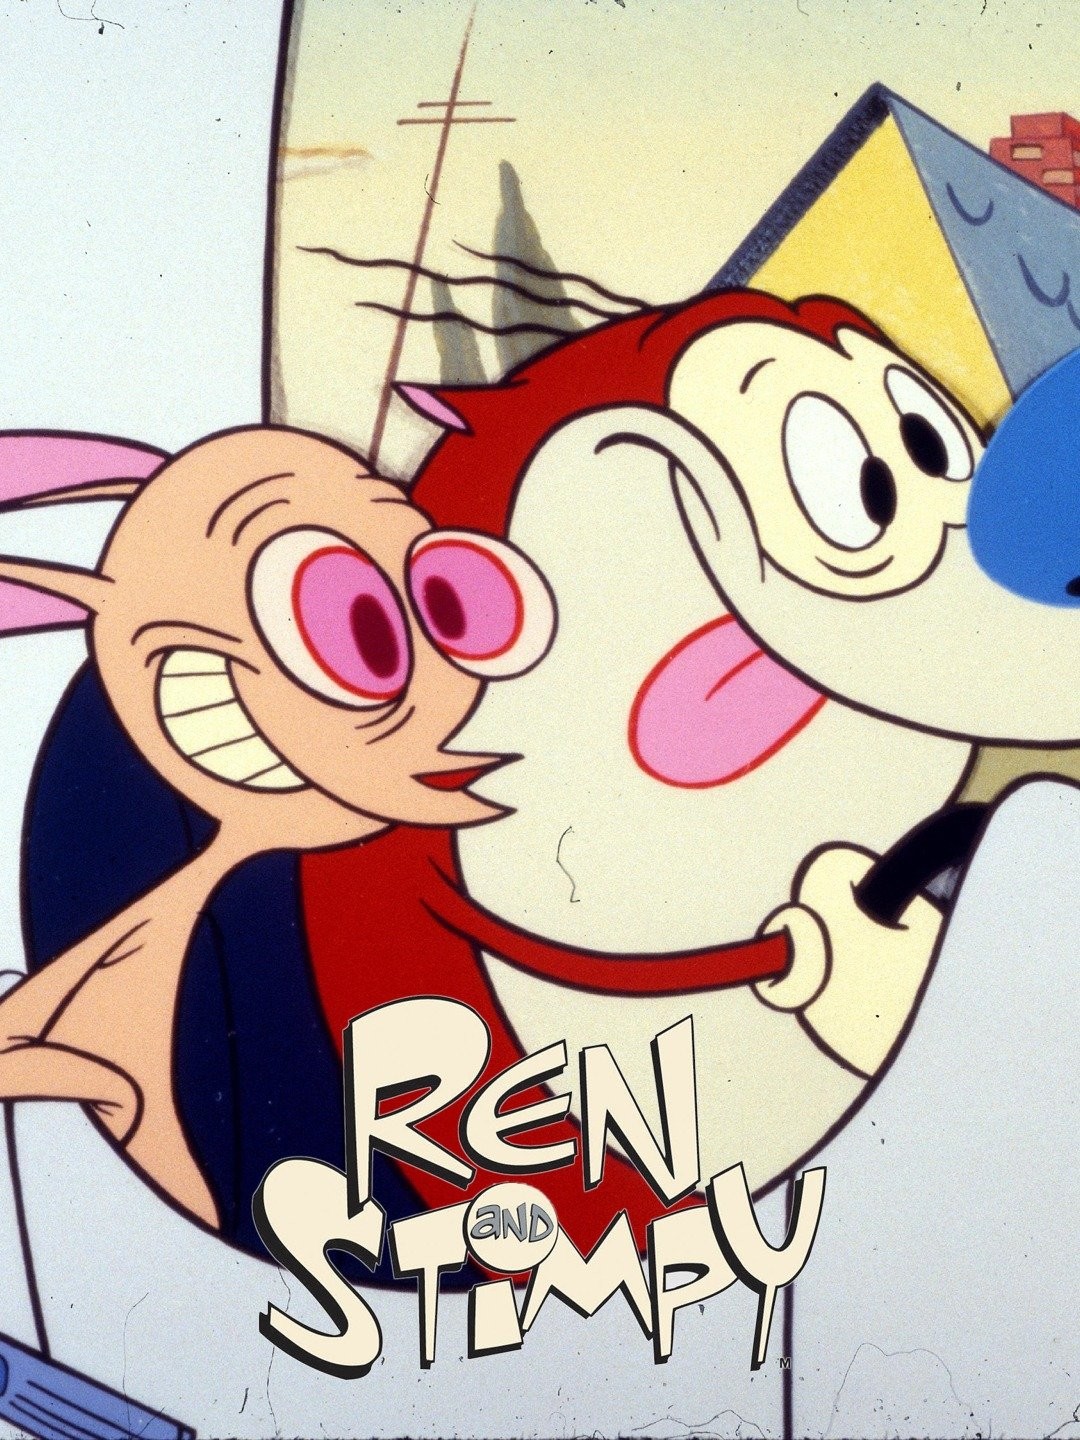 Best of Ren and stimpy complete series